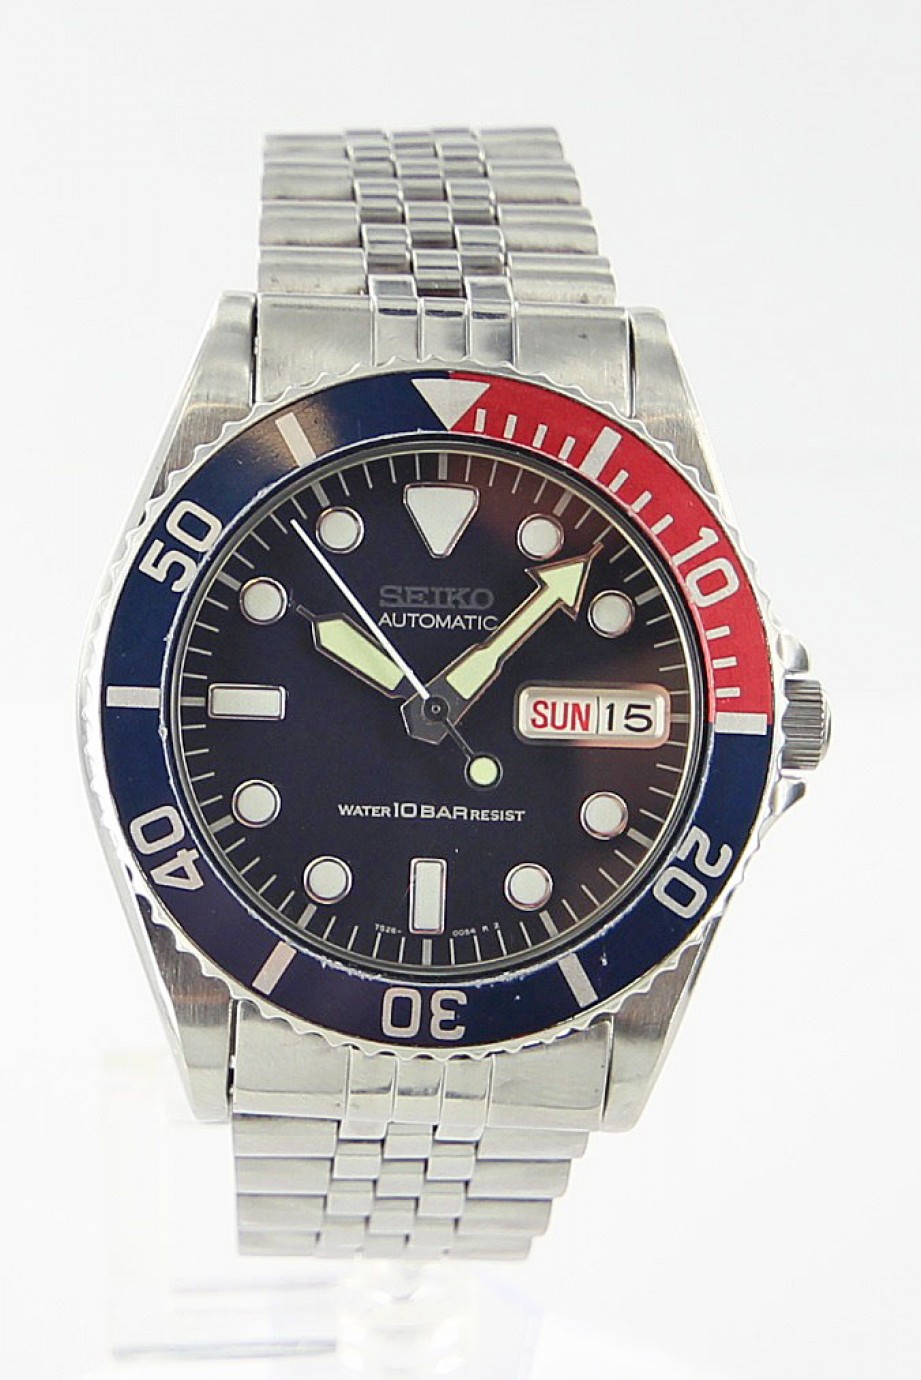 Seiko Mid-Size Divers Watch | Roath's Pawn